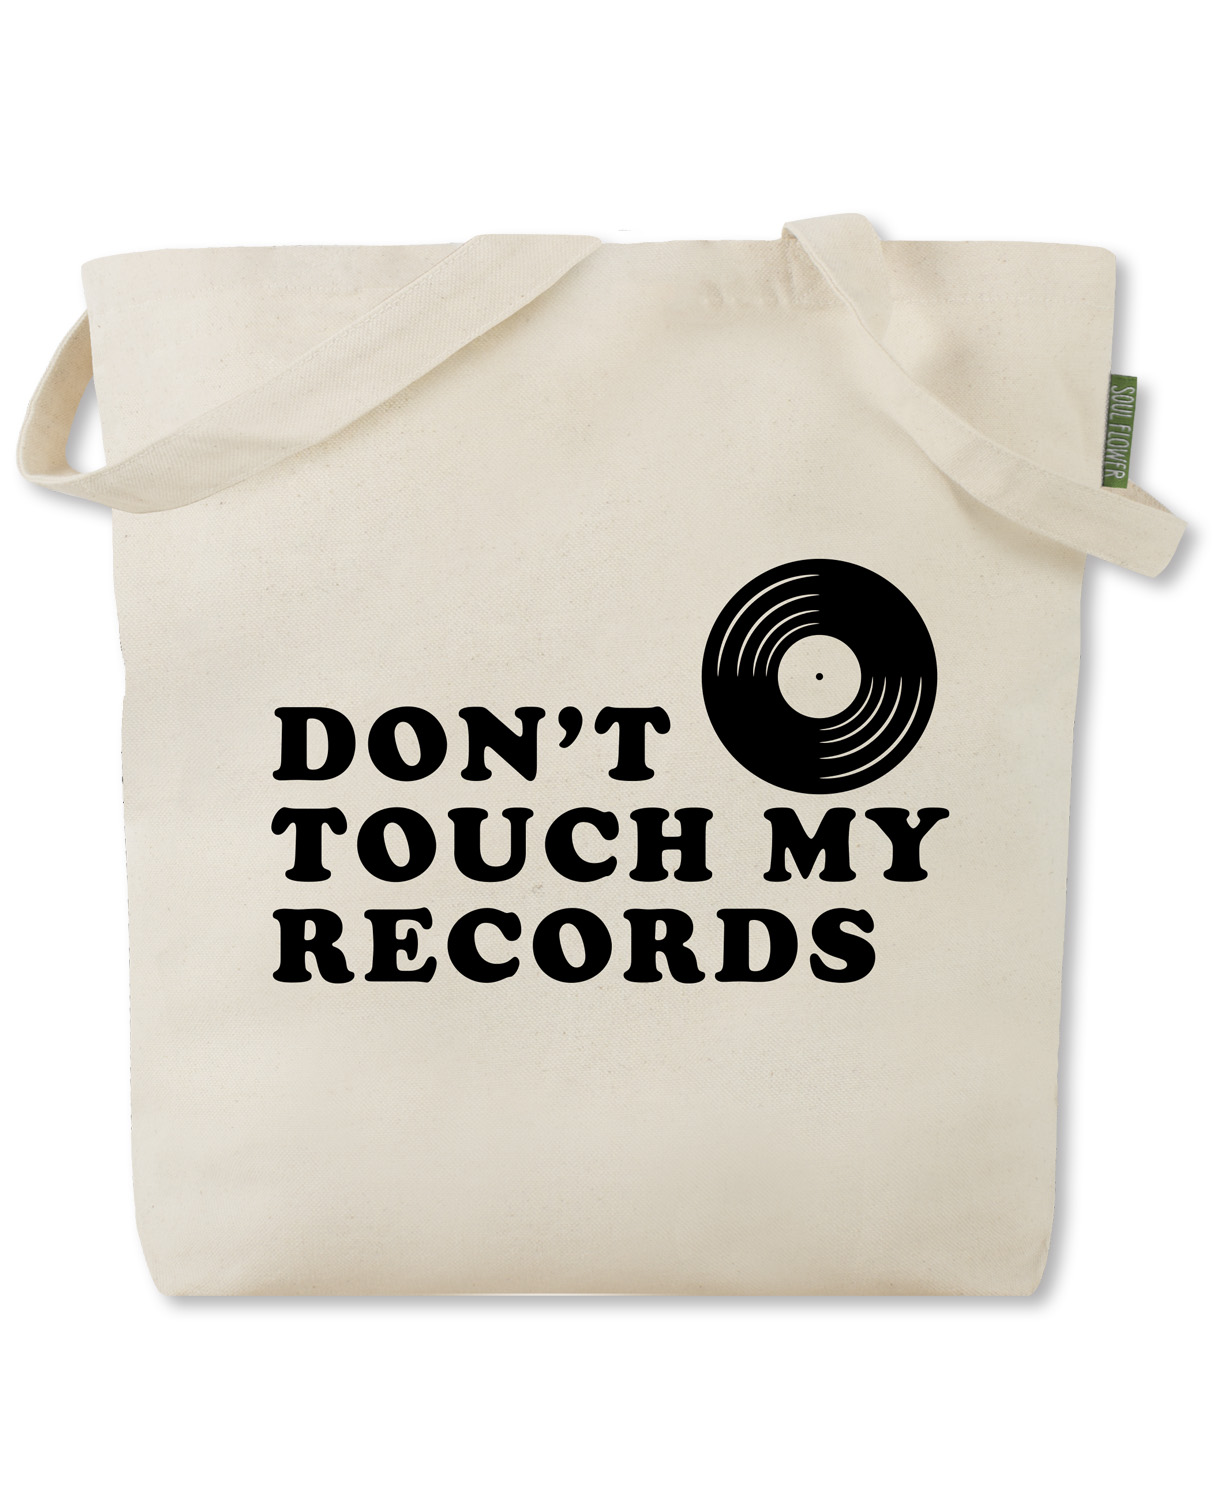 NEW! Don't Touch My Records Tote Bag